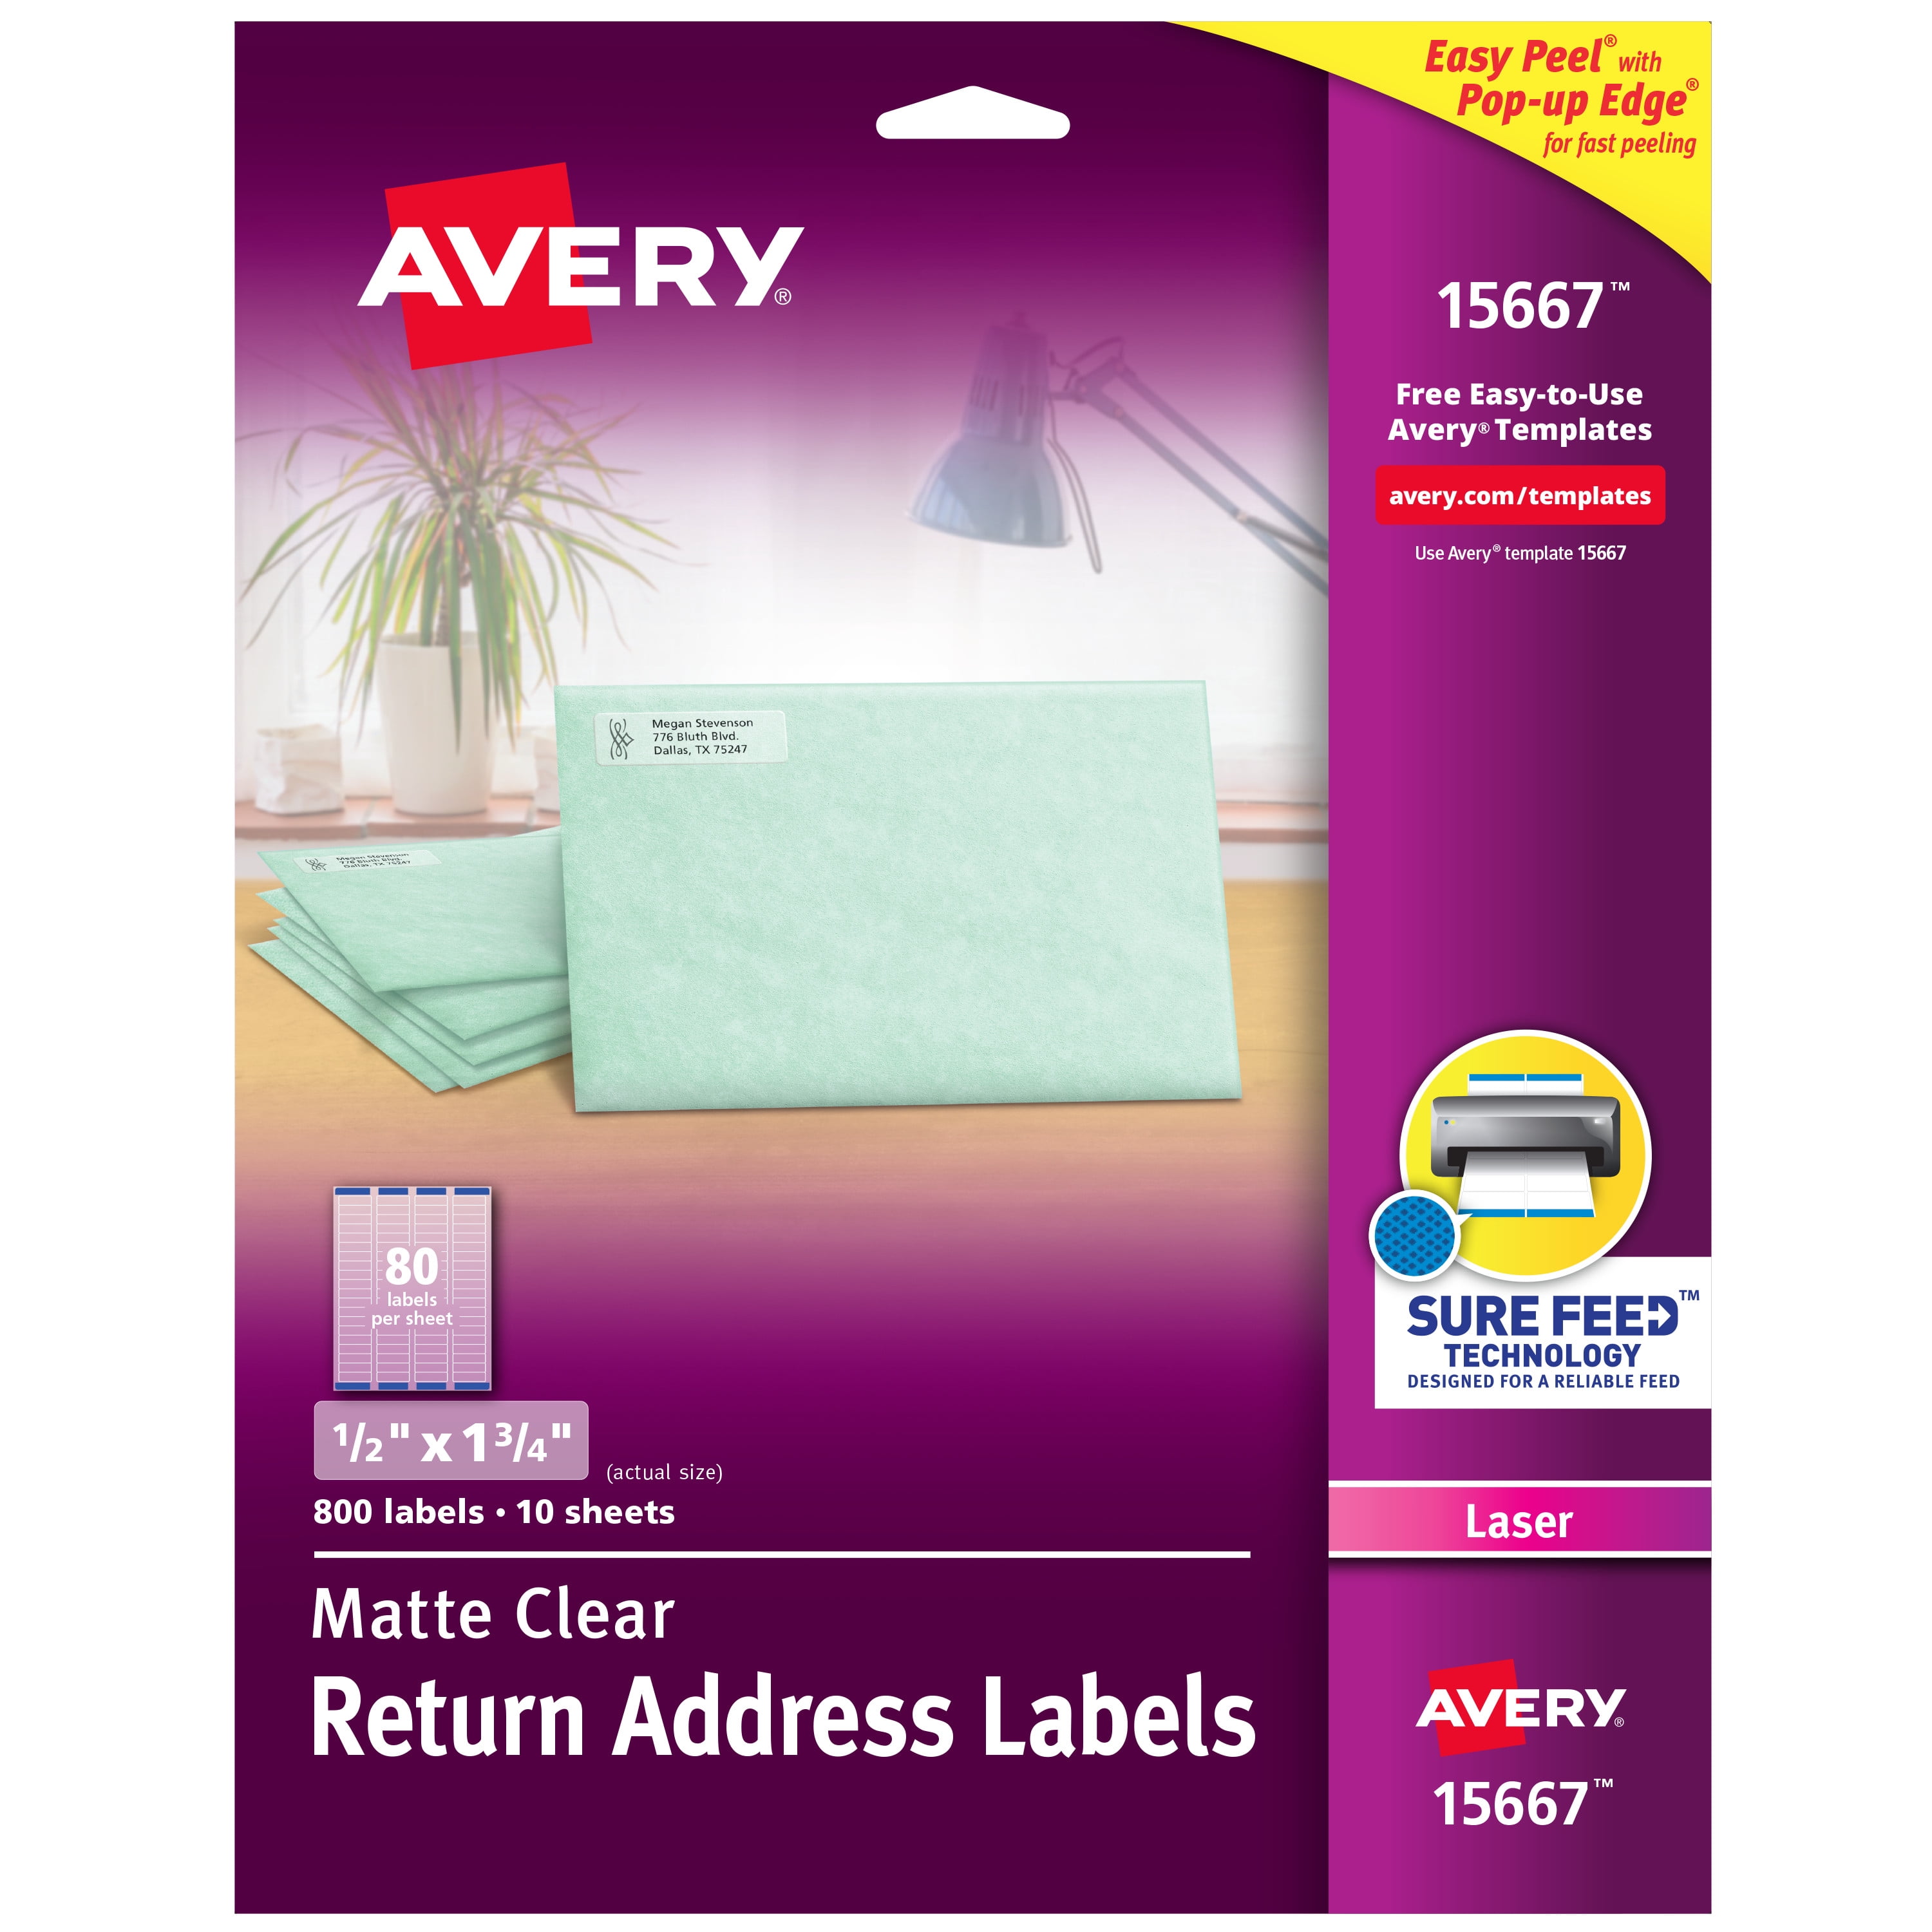 Avery Matte Clear Return Address Labels, Sure Feed Technology, Laser, 1